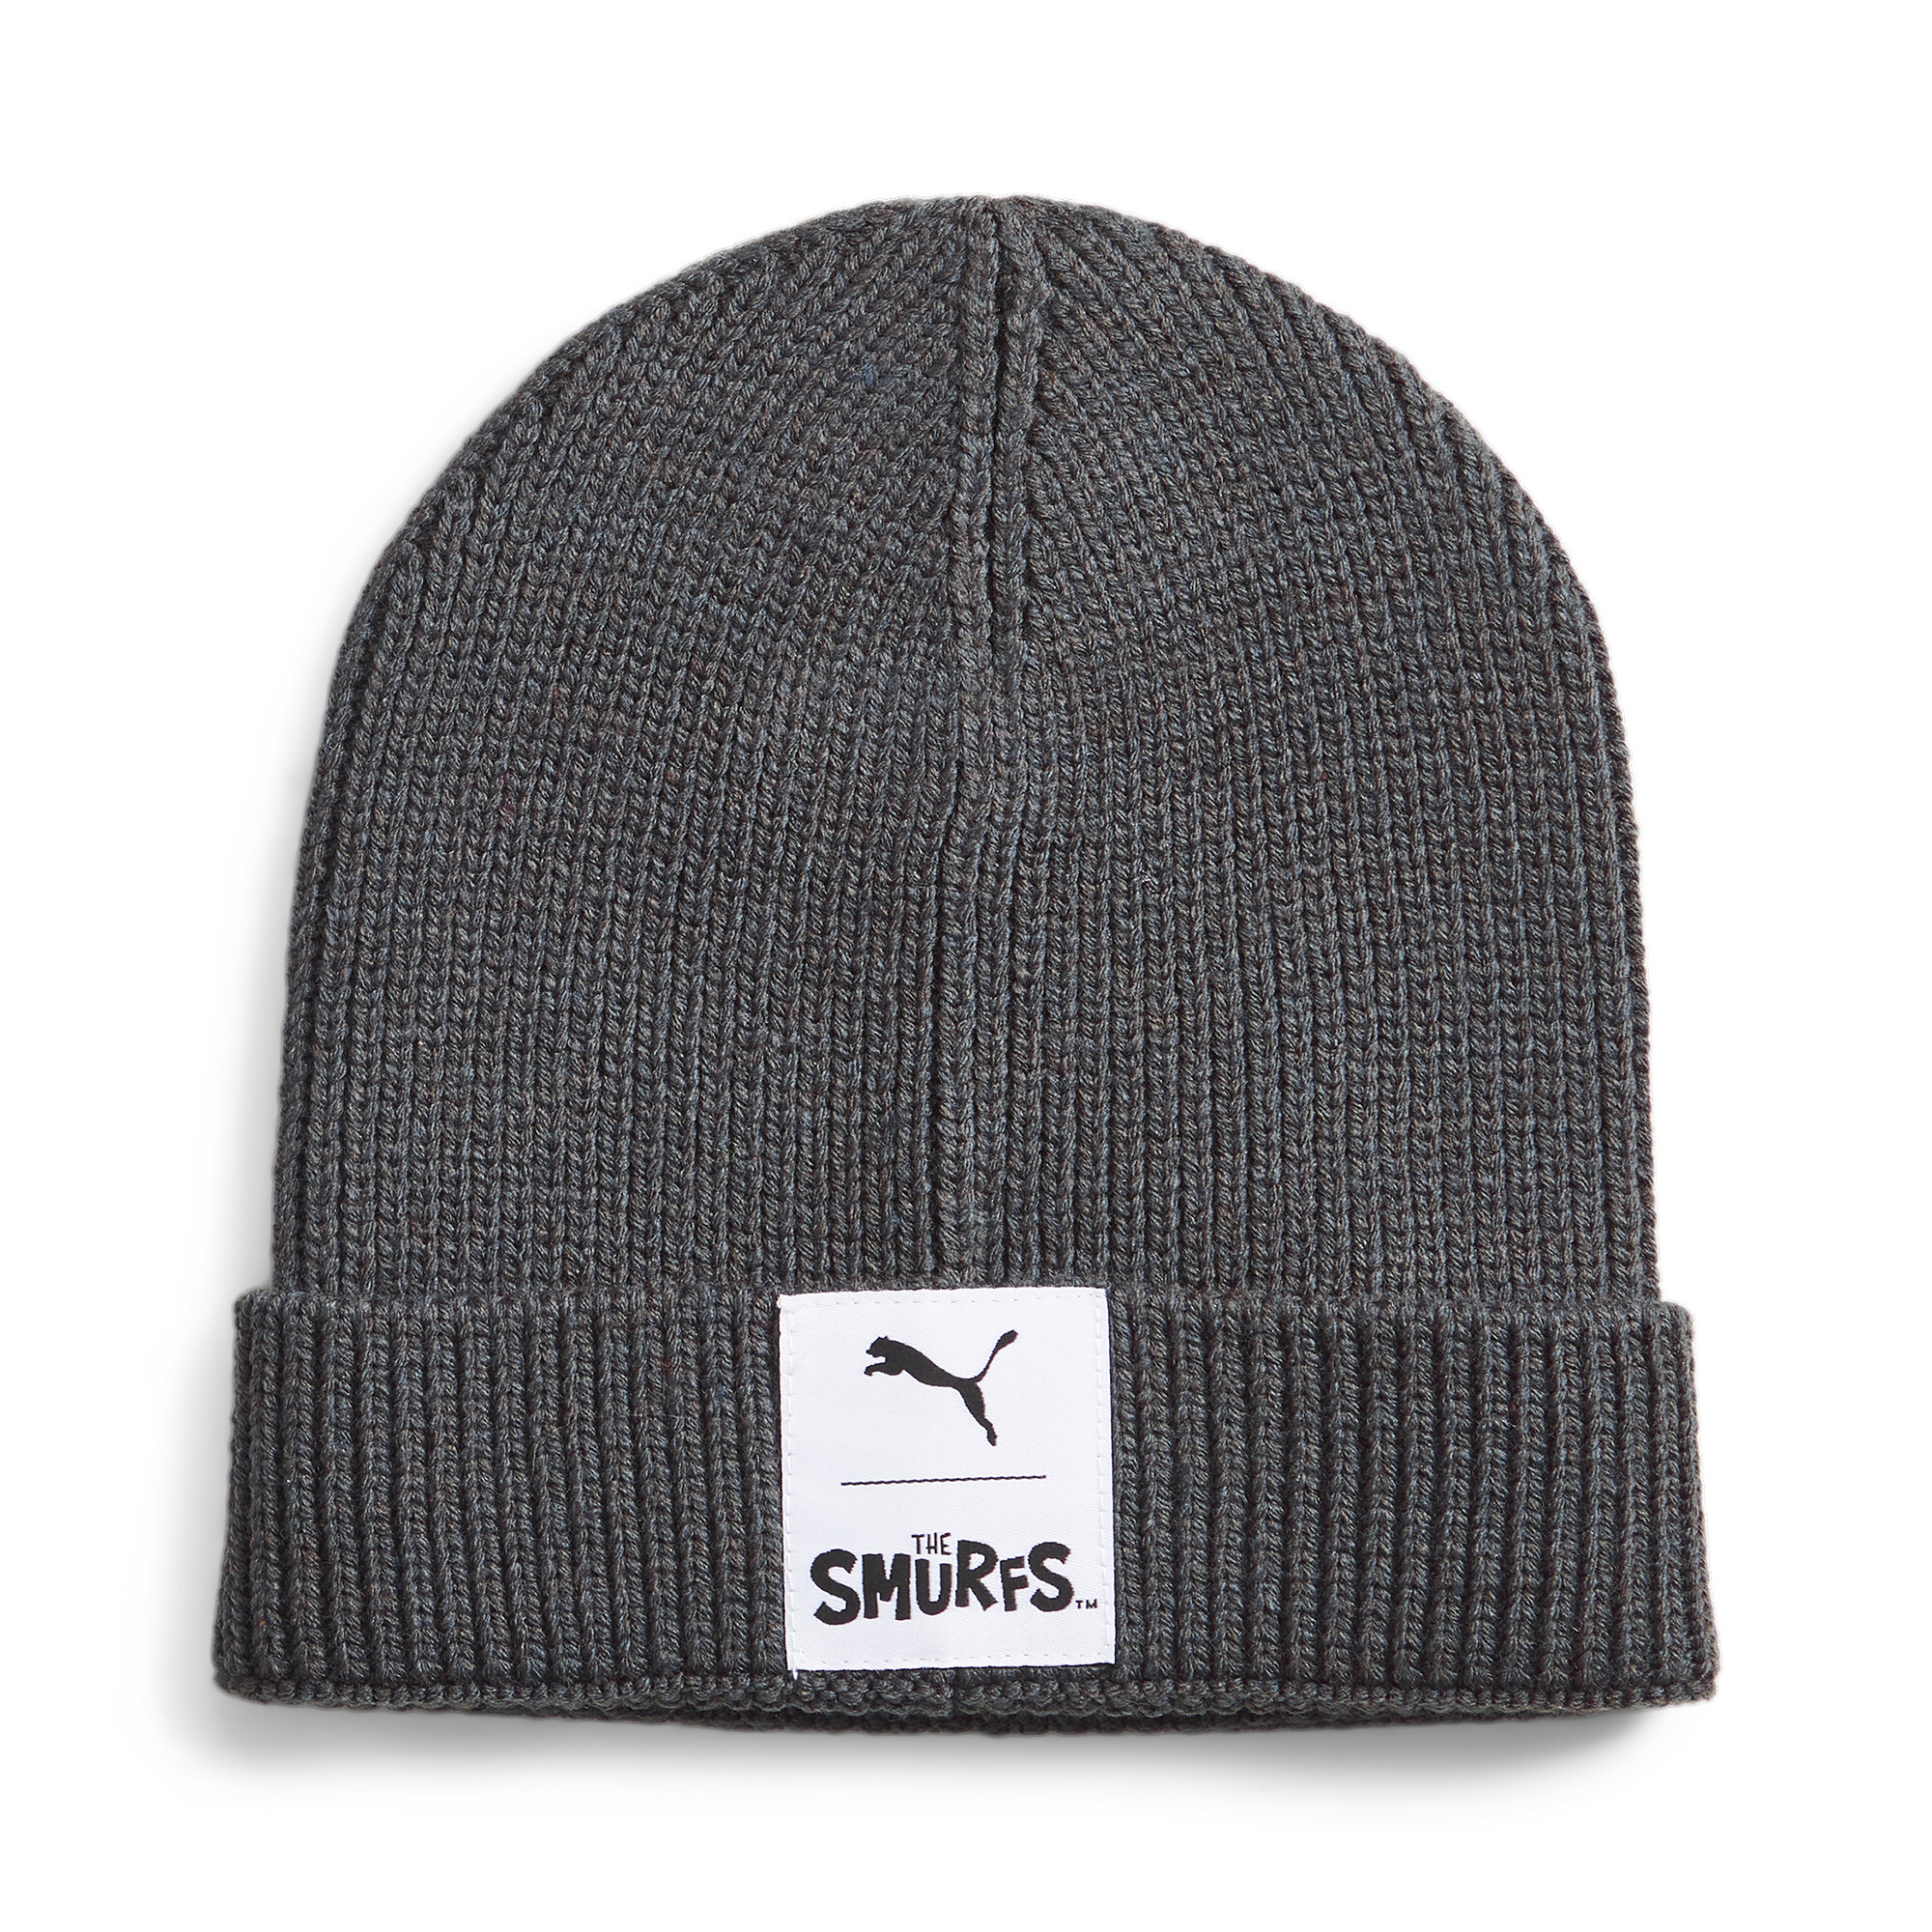 Puma X THE SMURFS Youth Beanie Hat, Gray, Accessories